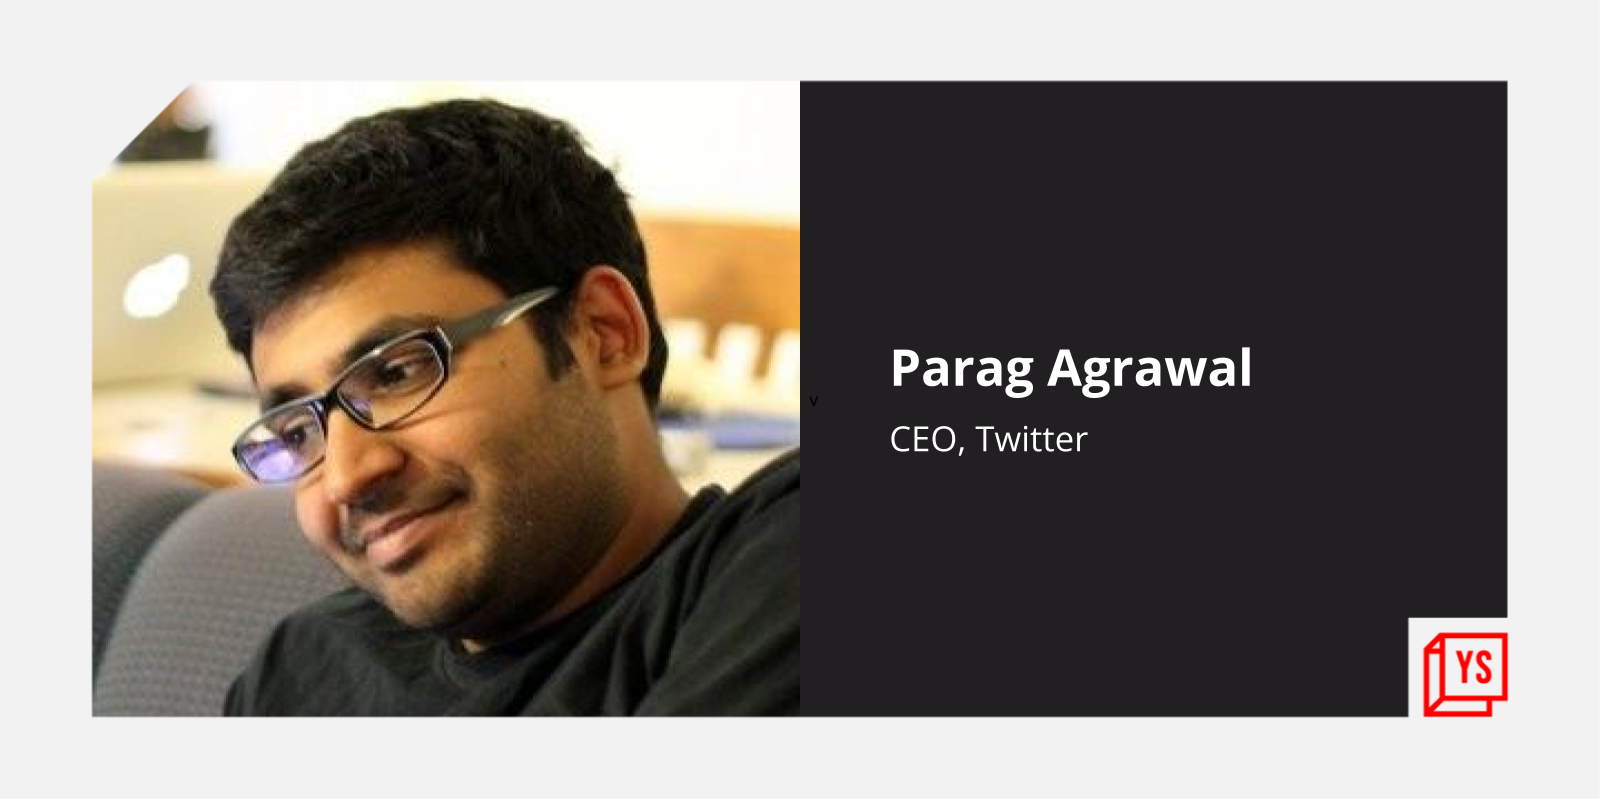 Twitter CEO Parag Agrawal will receive $42M if terminated